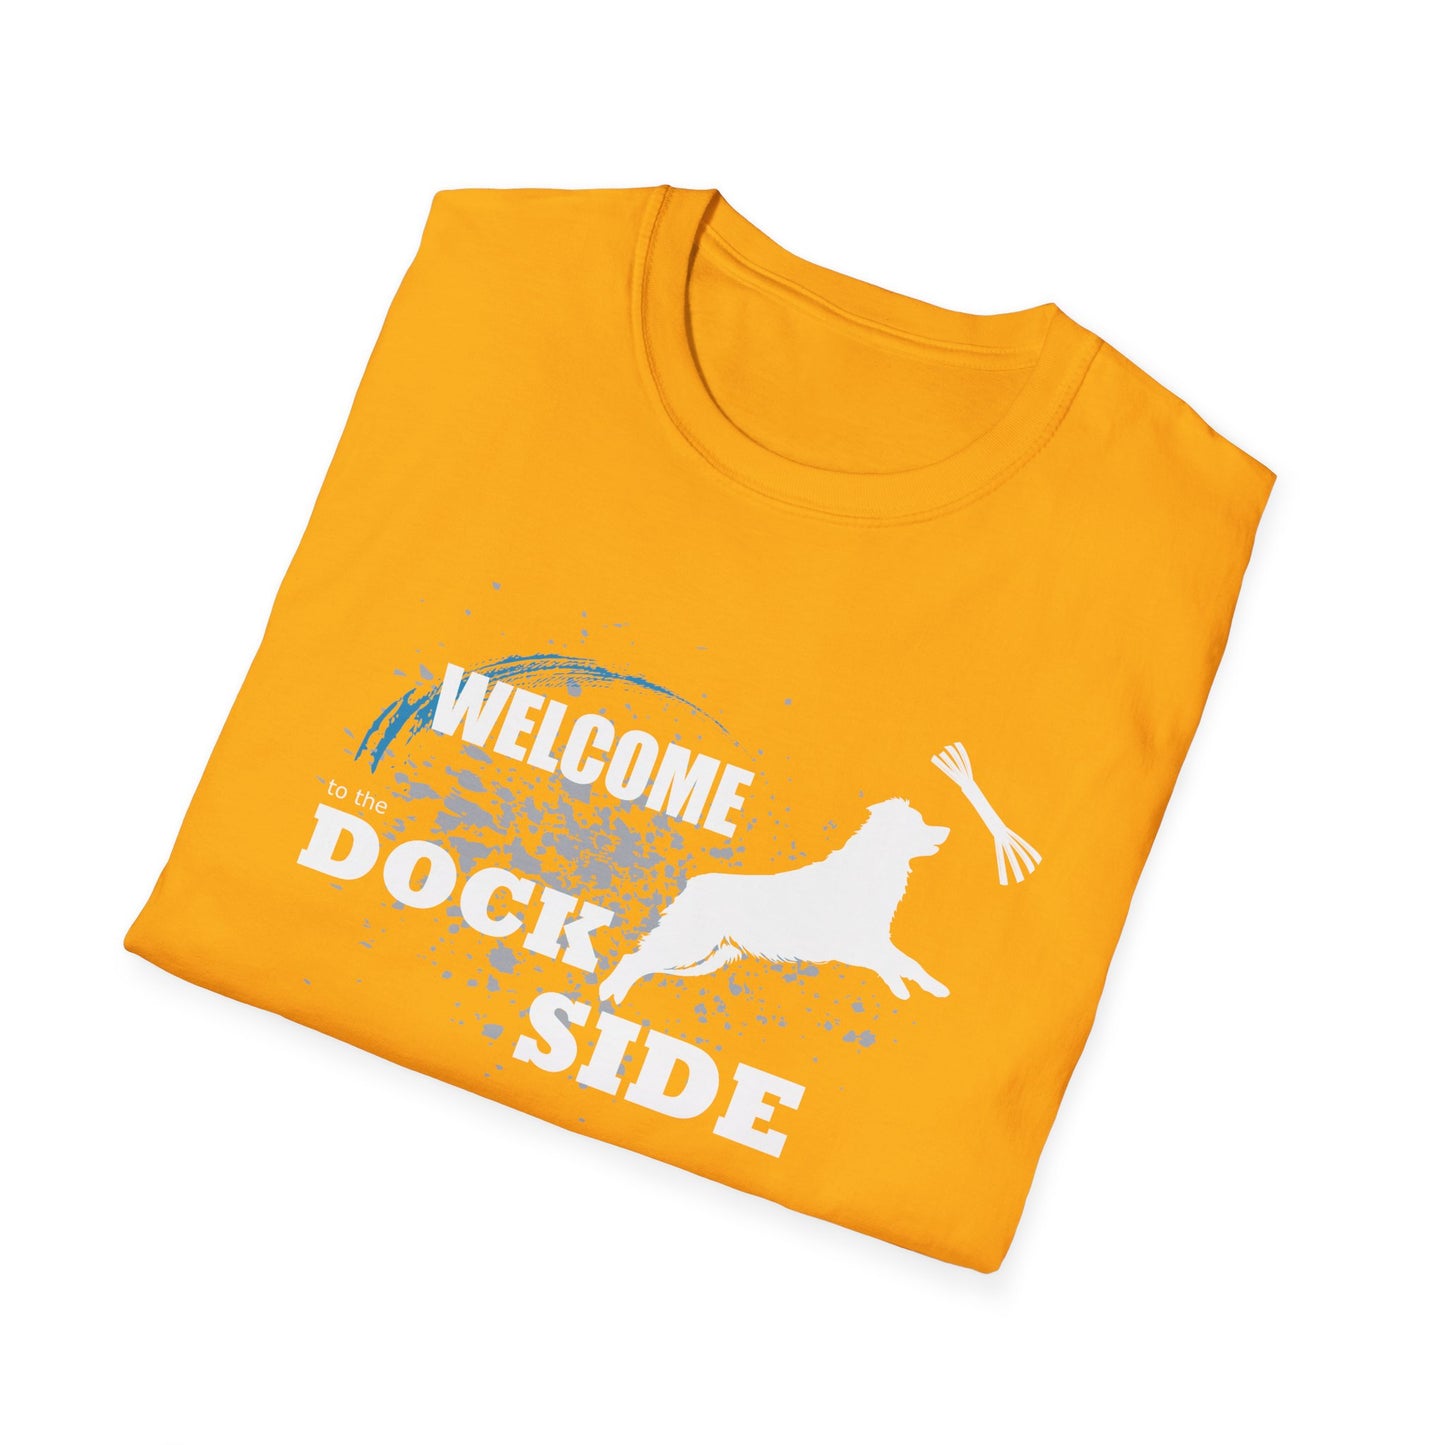 Copy of DOCK LIFE  AUSSIE  Unisex Softstyle T-Shirt